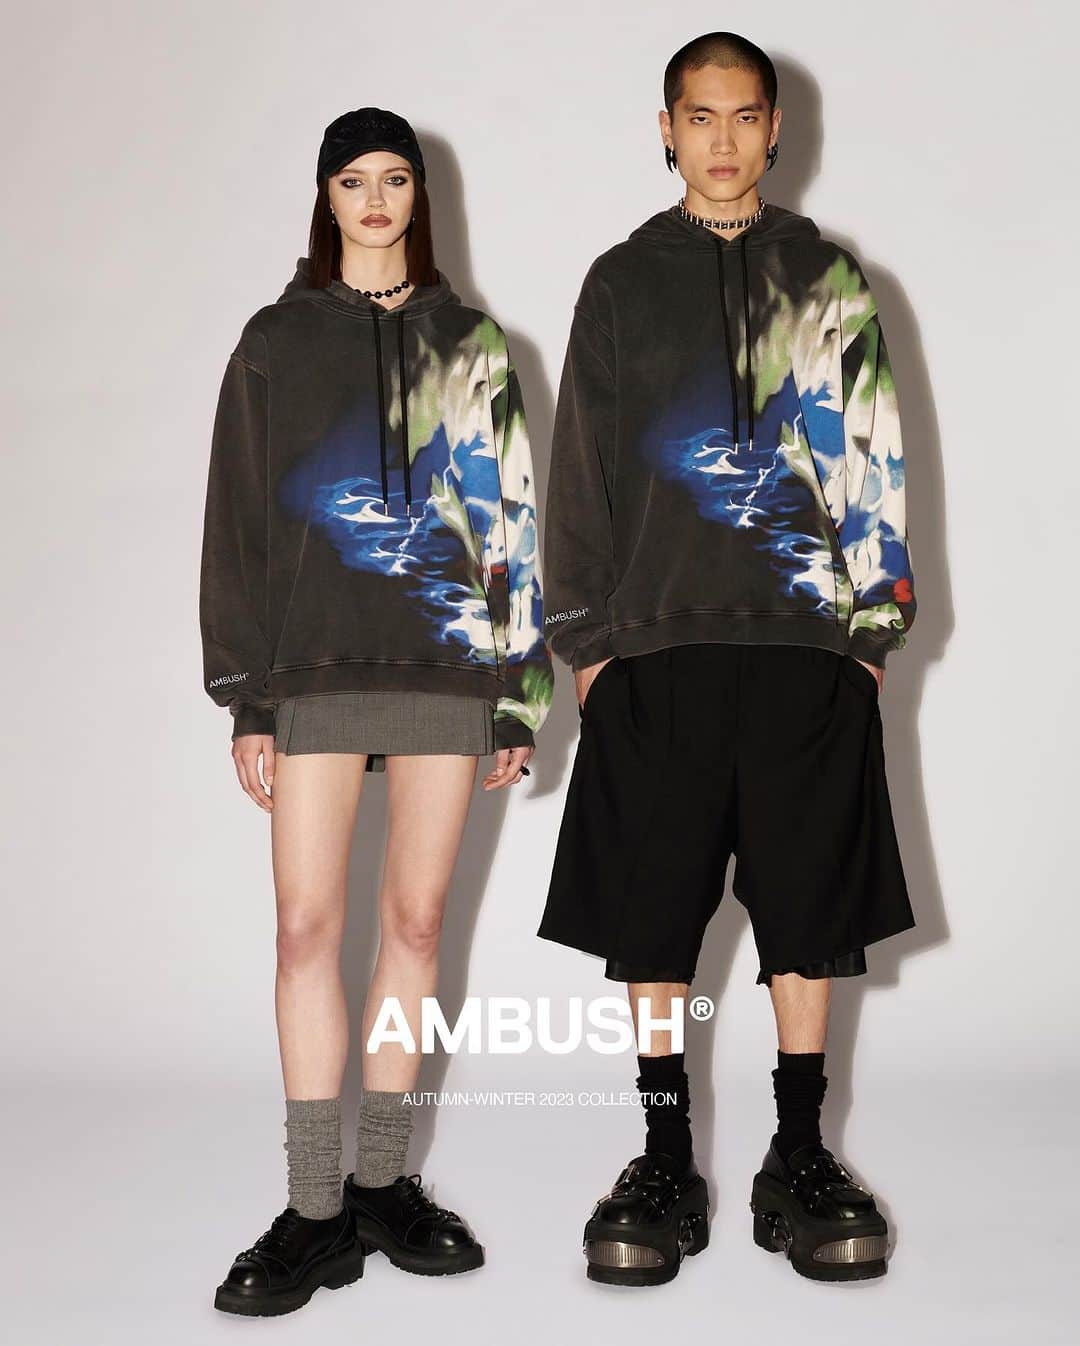 AMBUSHのインスタグラム：「Graffiti-inspired airbrush graphics that reference the natural elements on new unisex vintage-wash tees and hoodies. Now available at our WEBSHOP and WORKSHOP.」